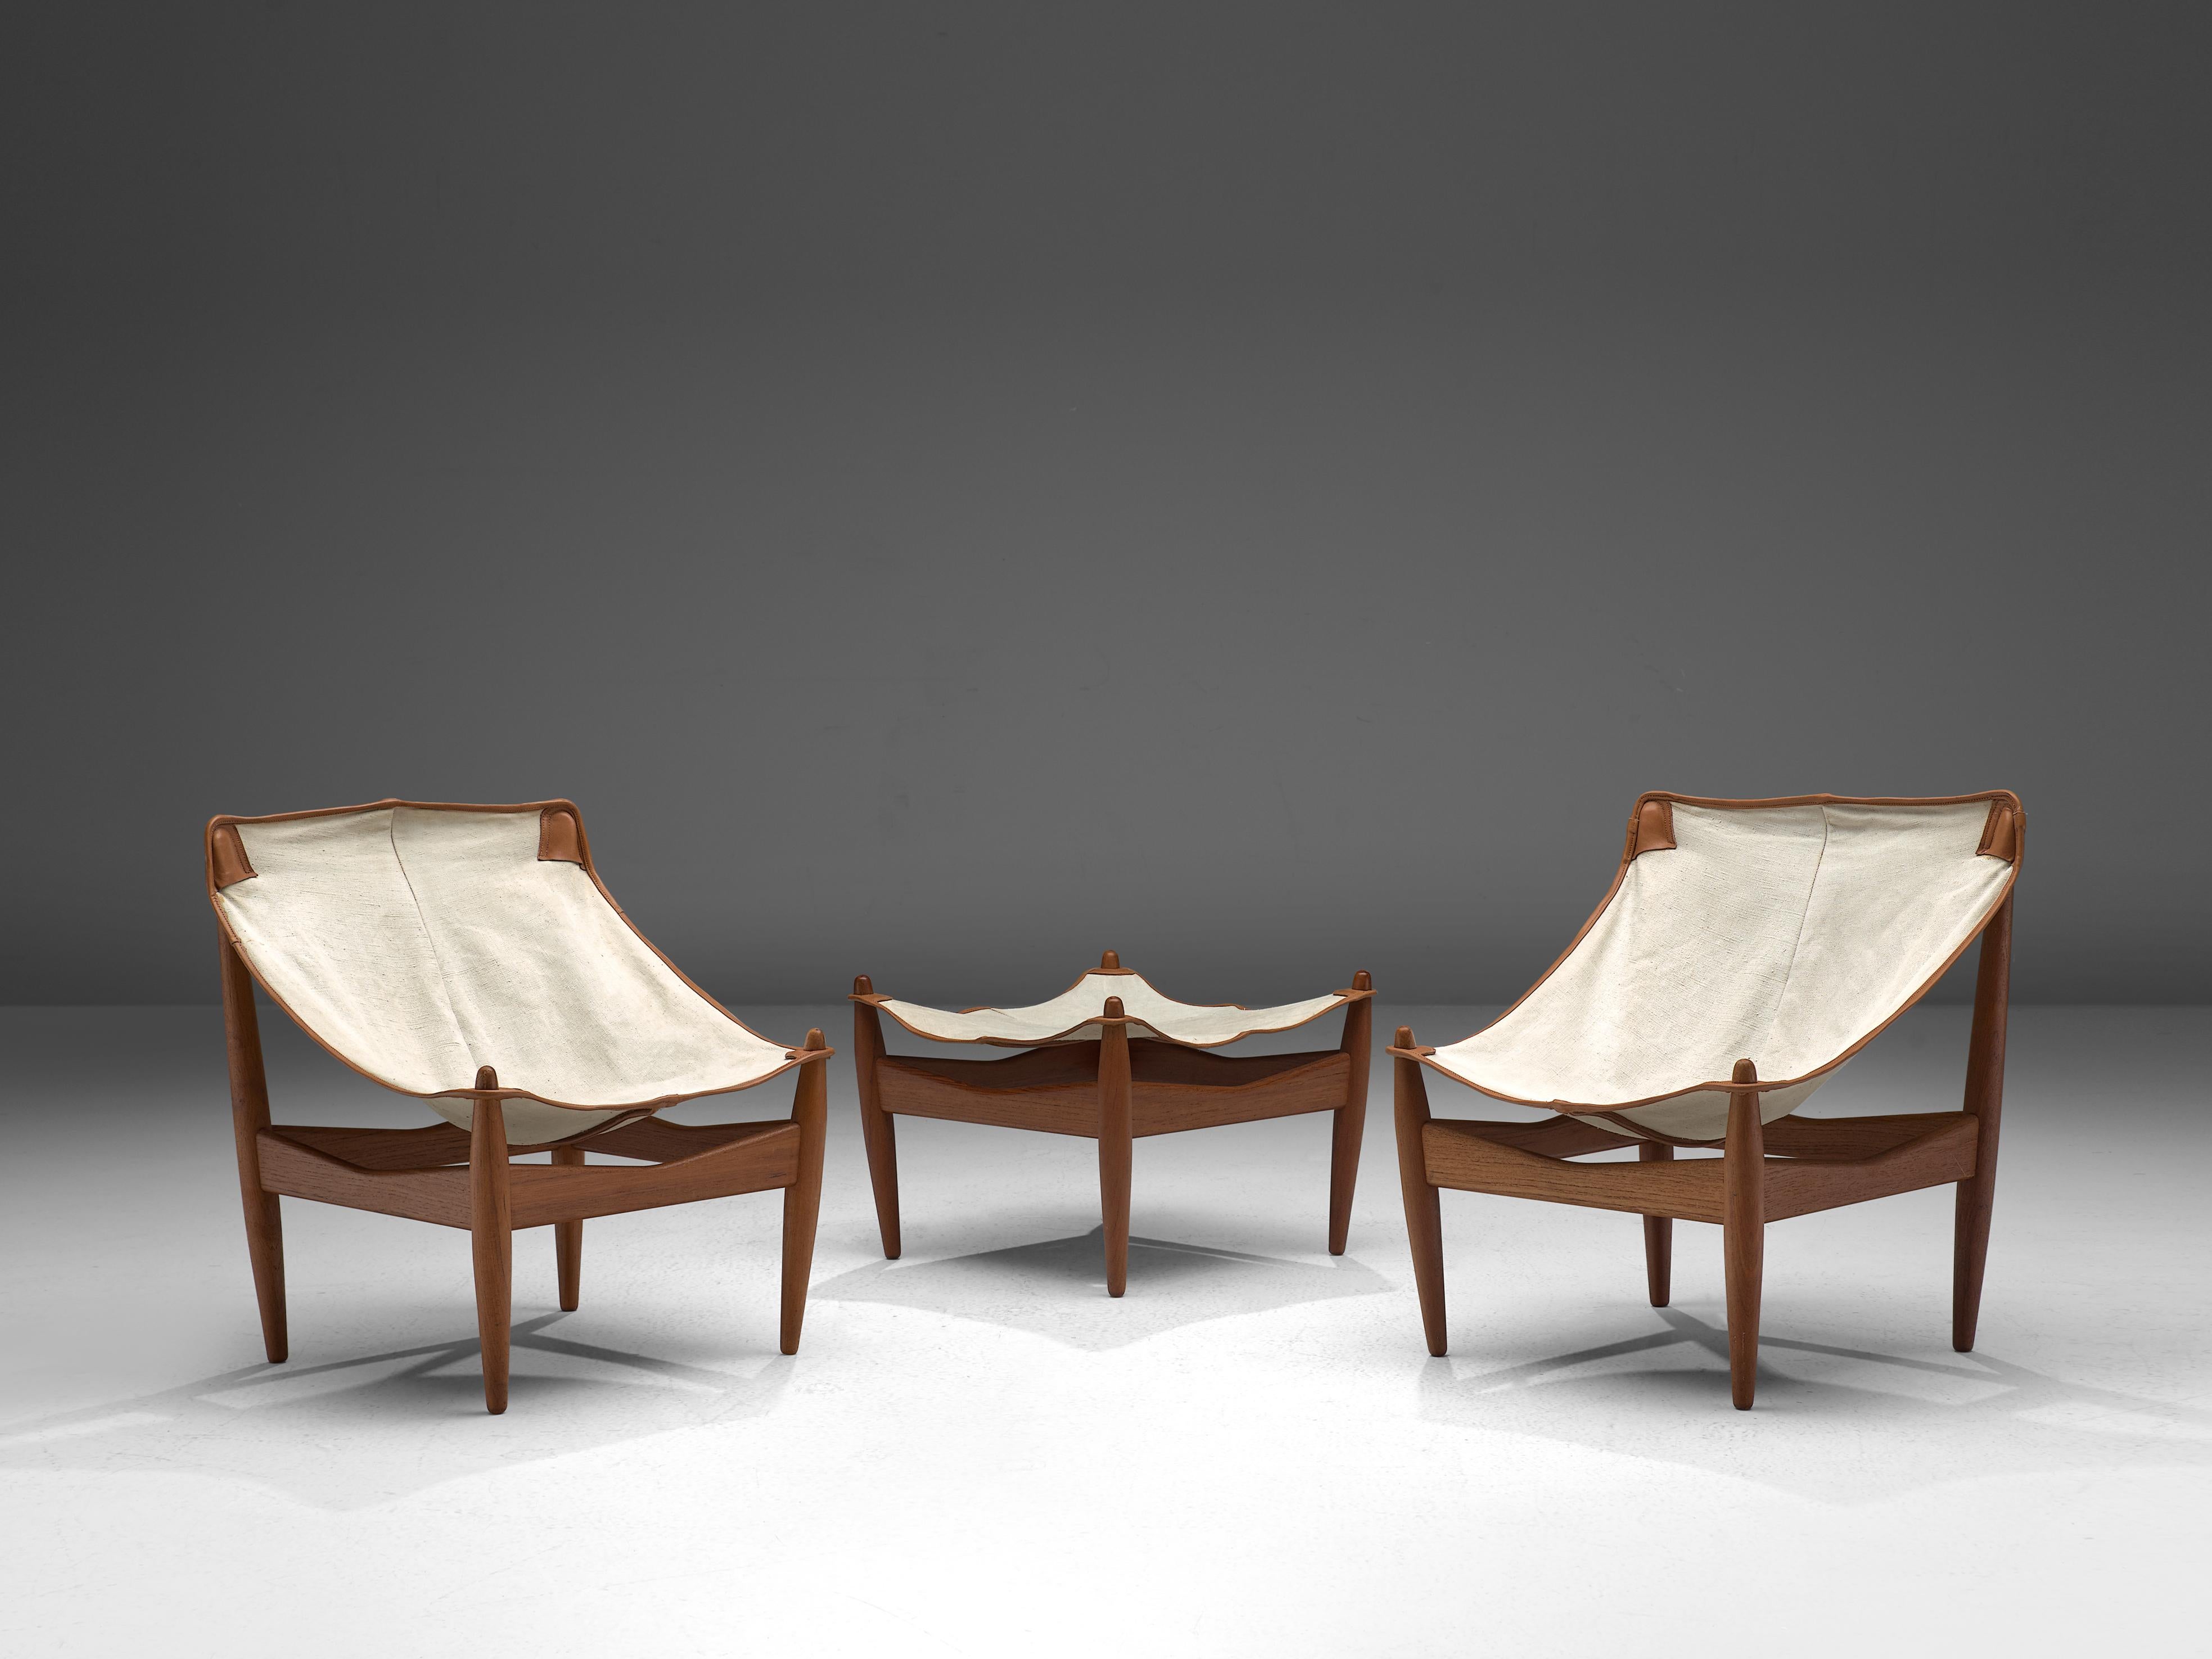 Illum Wikkelsø for C.F. Christiansen, pair of easy chairs and ottoman model 272, teak, off-white canvas, leather, Denmark, 1963

Very rare easy chairs and ottoman by Danish designer Illum Wikkelsø in teak and canvas. The solid teak legs are tapered